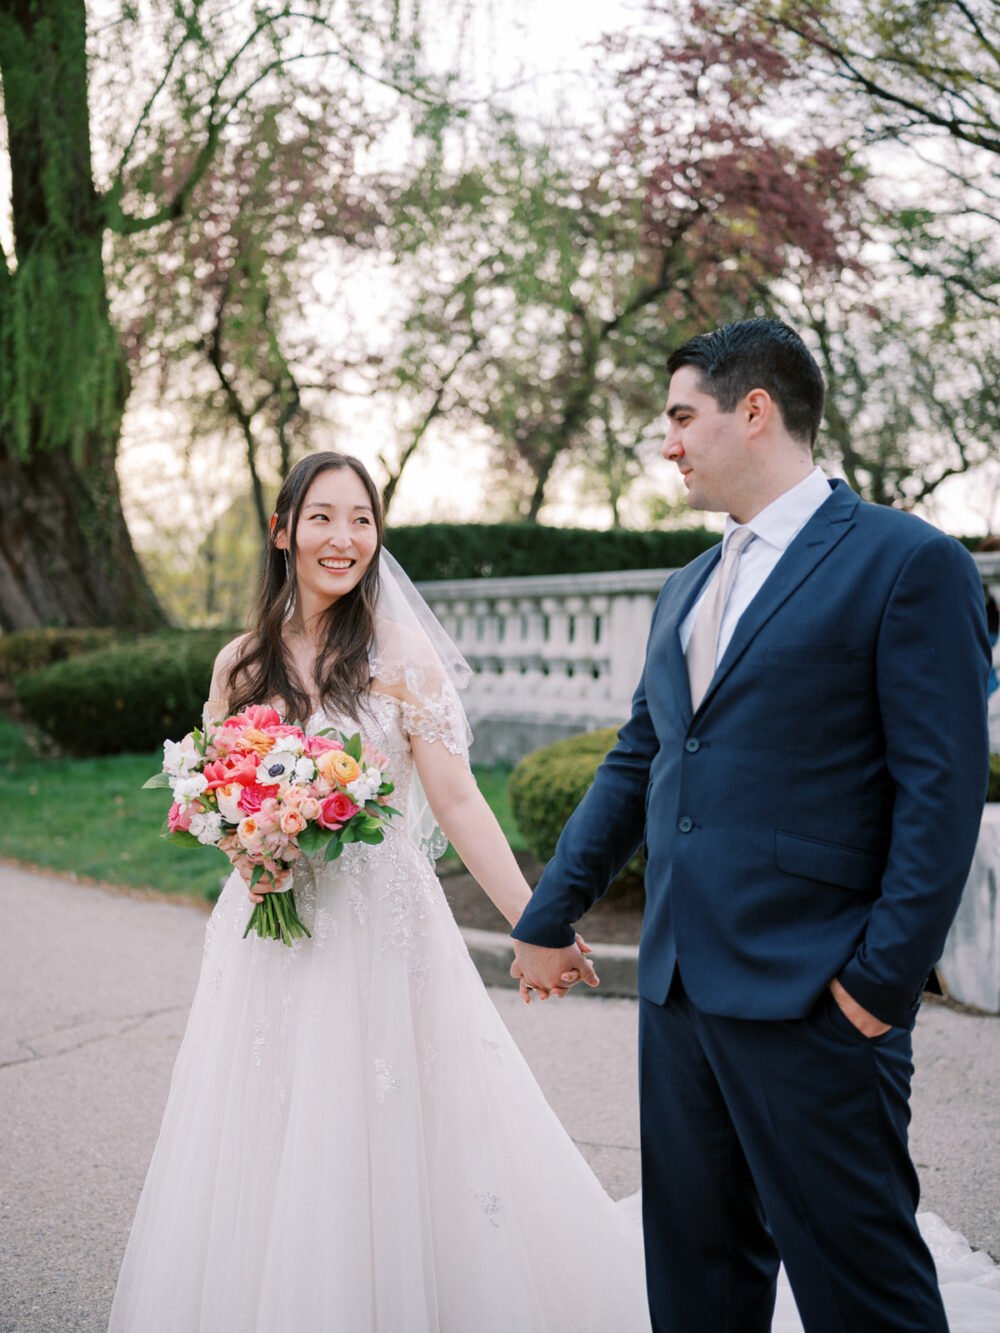 Spring wedding portraits at Cleveland Art Museum photographed by Juliana Kae, top Cleveland wedding photographer